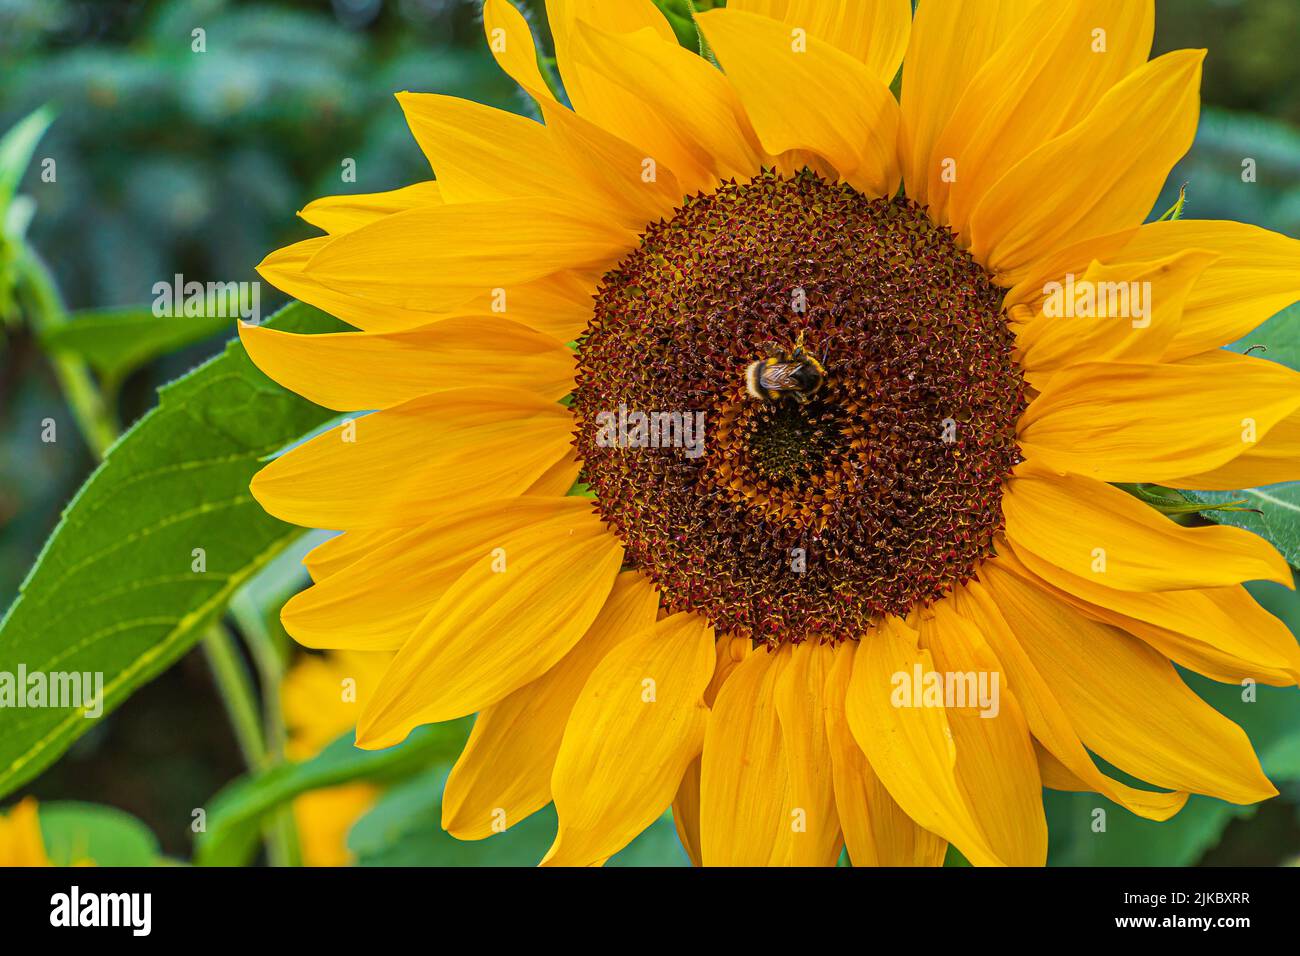 Large sunflowers in bloom. perfect yellow leaves of the flower. Sunflower seeds in the center of the flower. single bee on the flower. Green leaves Stock Photo